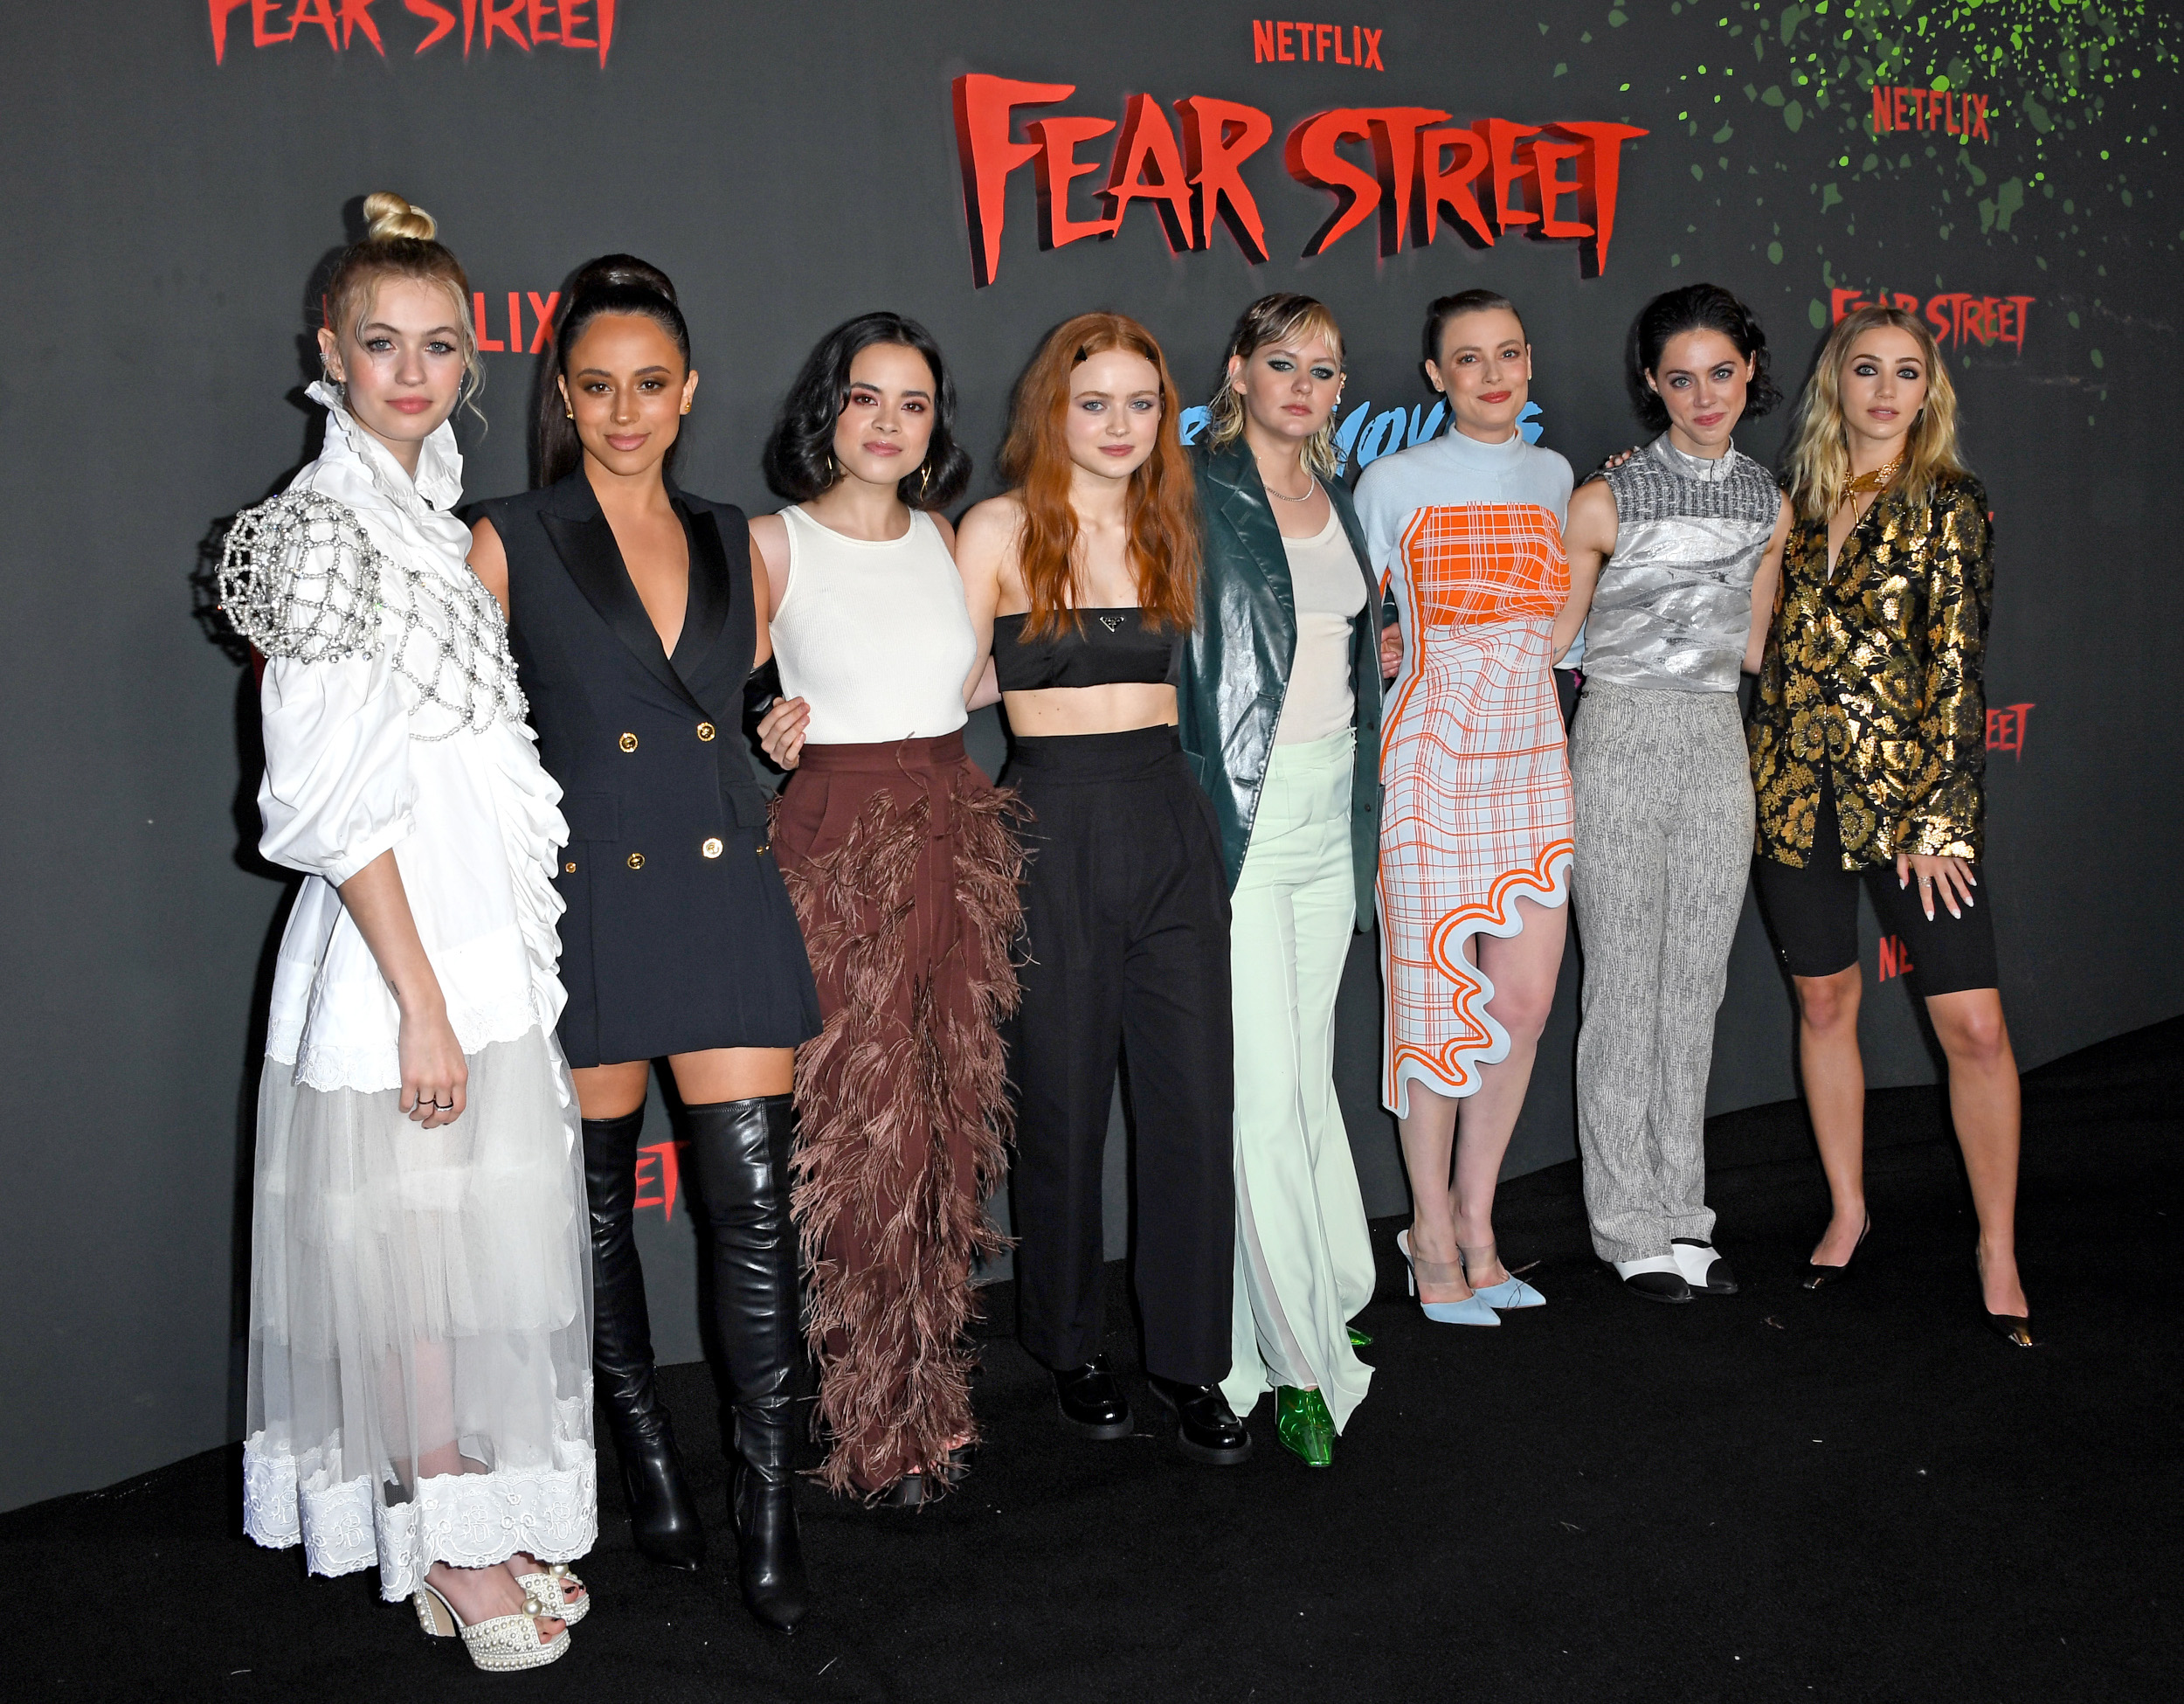 'Fear Street' stars Olivia Scott Welch, Kiana Madeira, Julia Rehwald, Sadie Sink, Ryan Simpkins, Gillian Jacobs, Elizabeth Scopel, and Emily Rudd stand in a row wearing dresses and suits